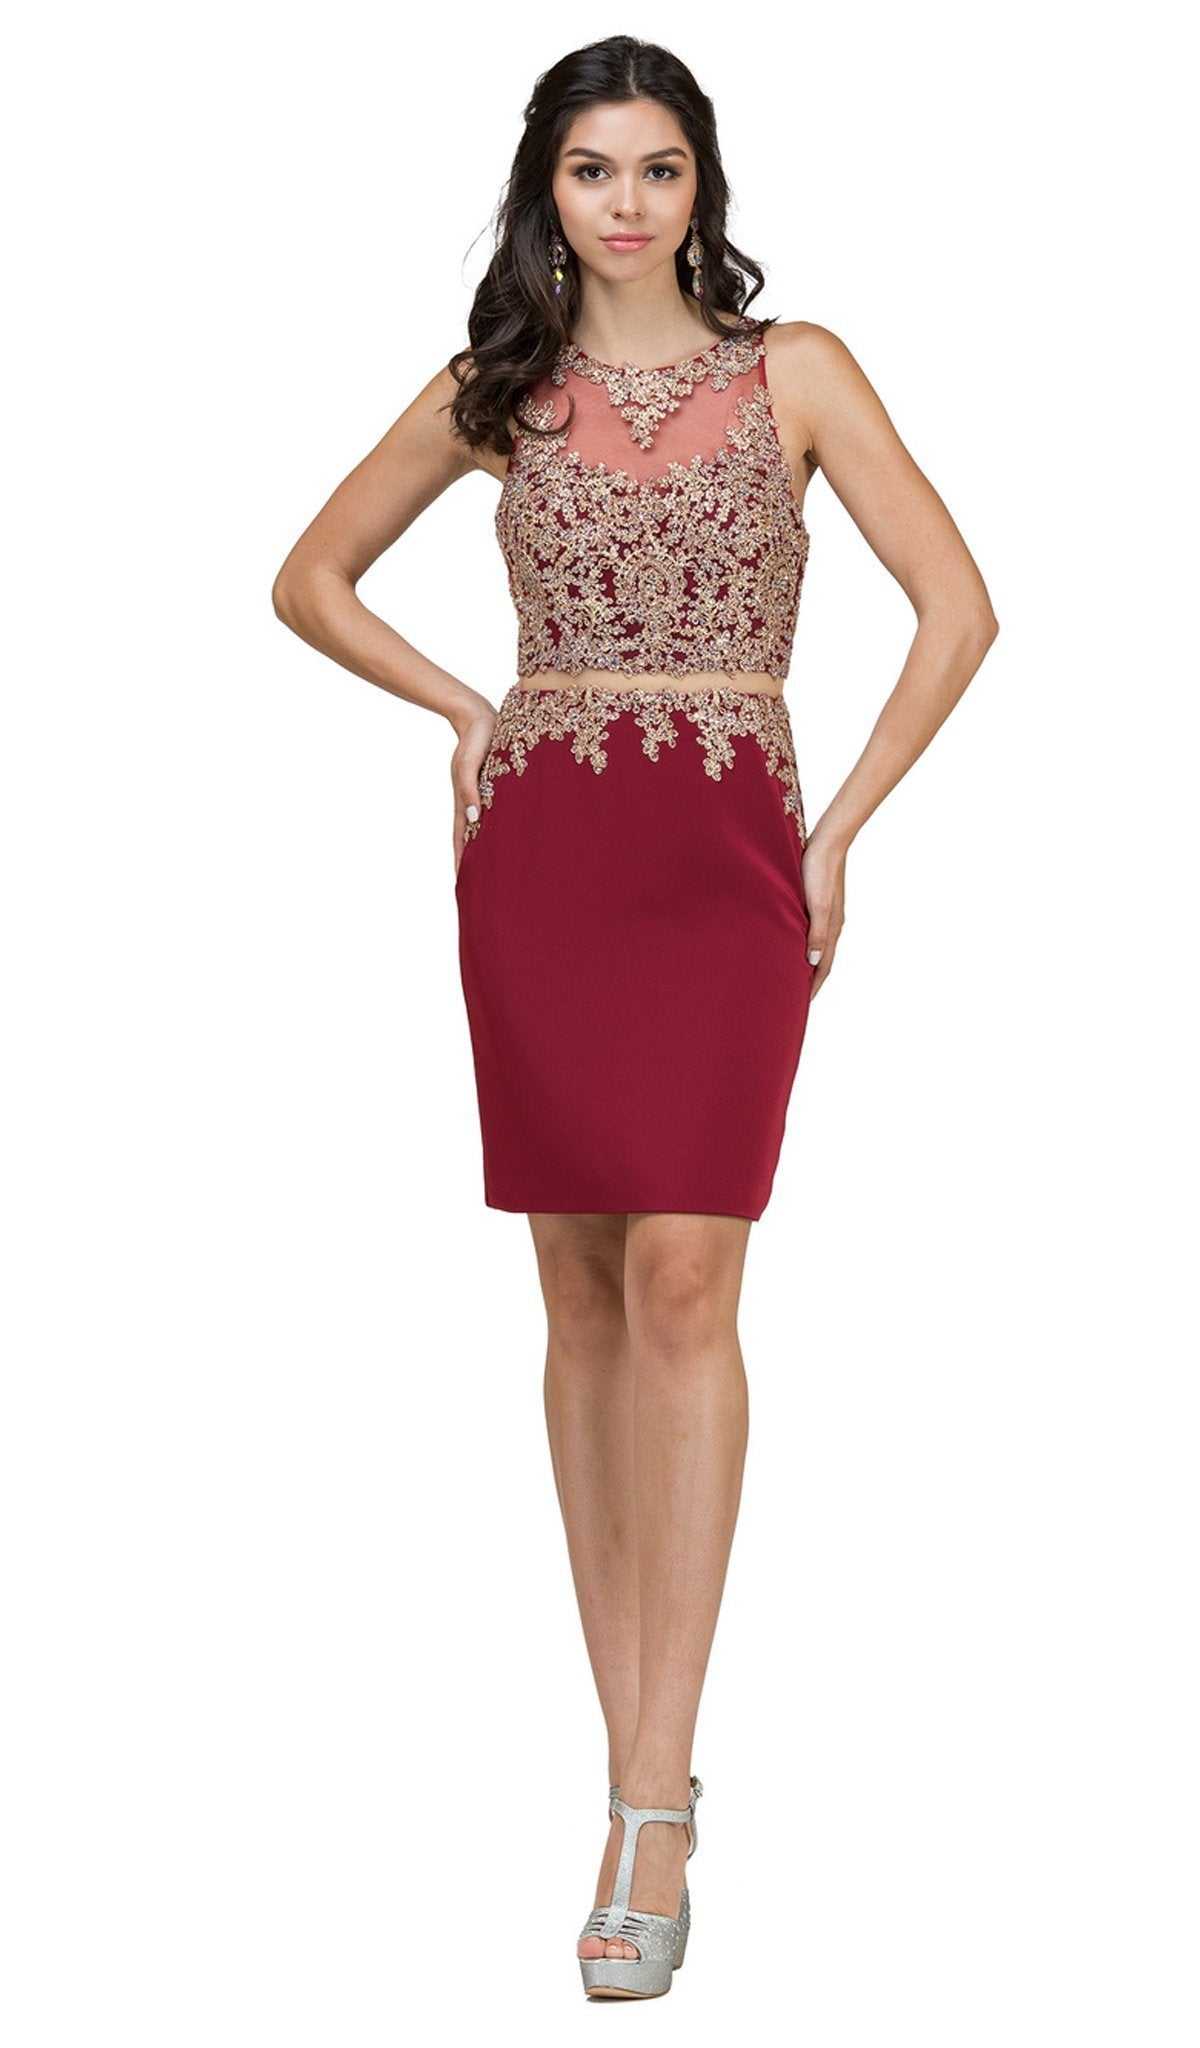 Dancing Queen, Dancing Queen - 2000 Mock Two-Piece Illusion Lace Cocktail Dress